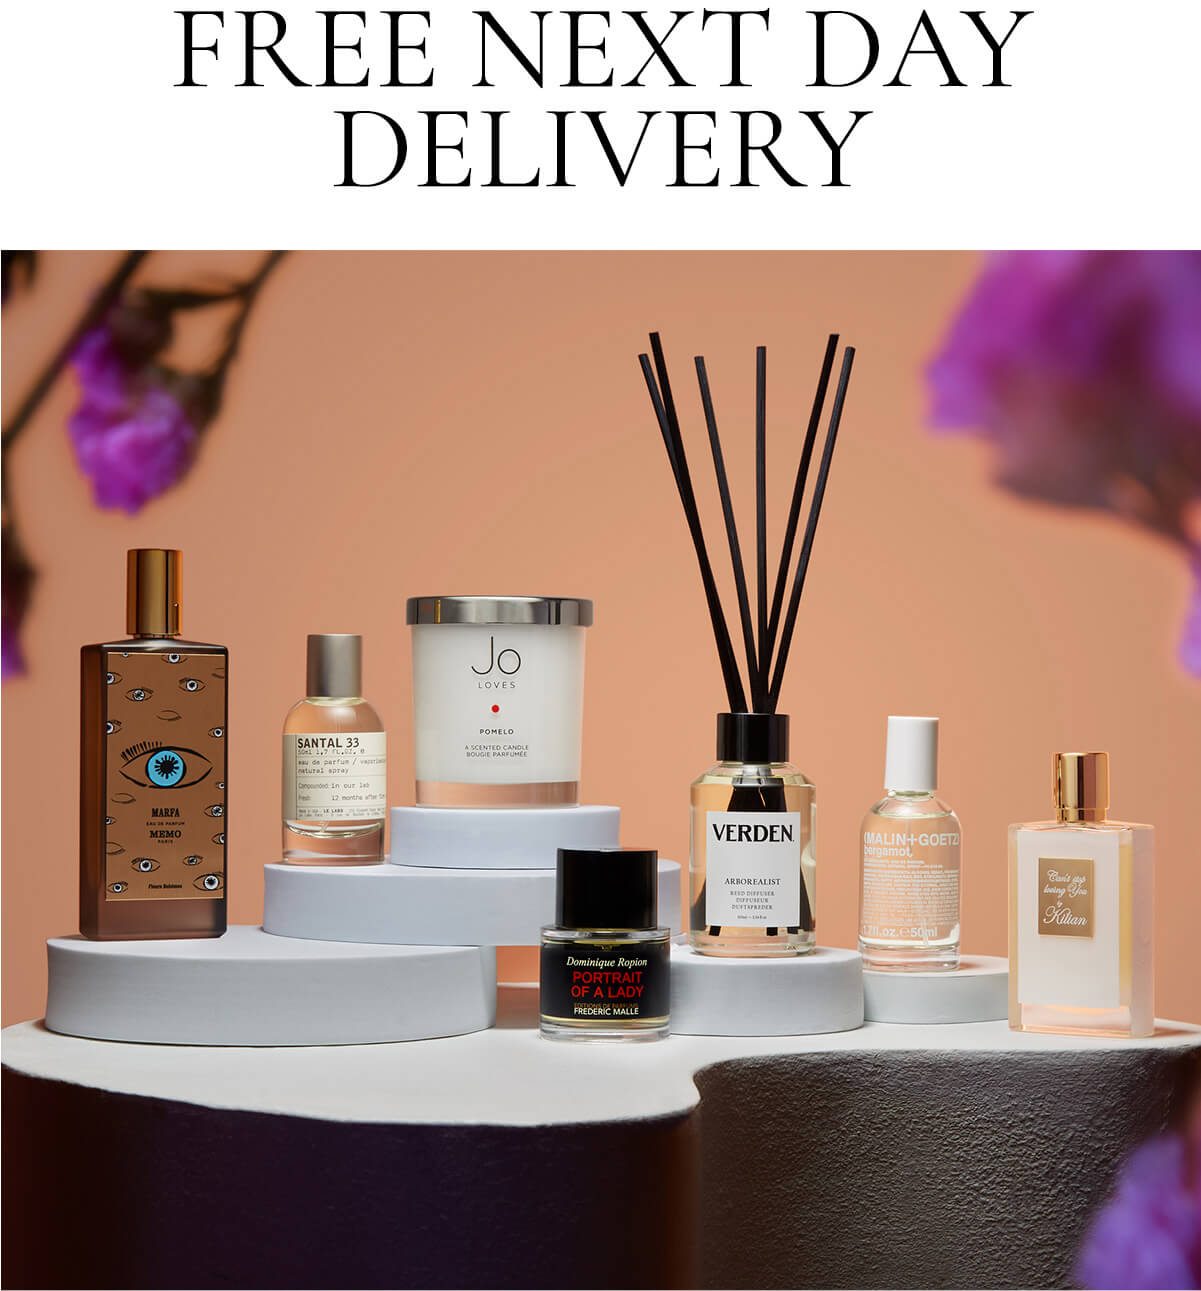 FREE NEXT DAY DELIVERY